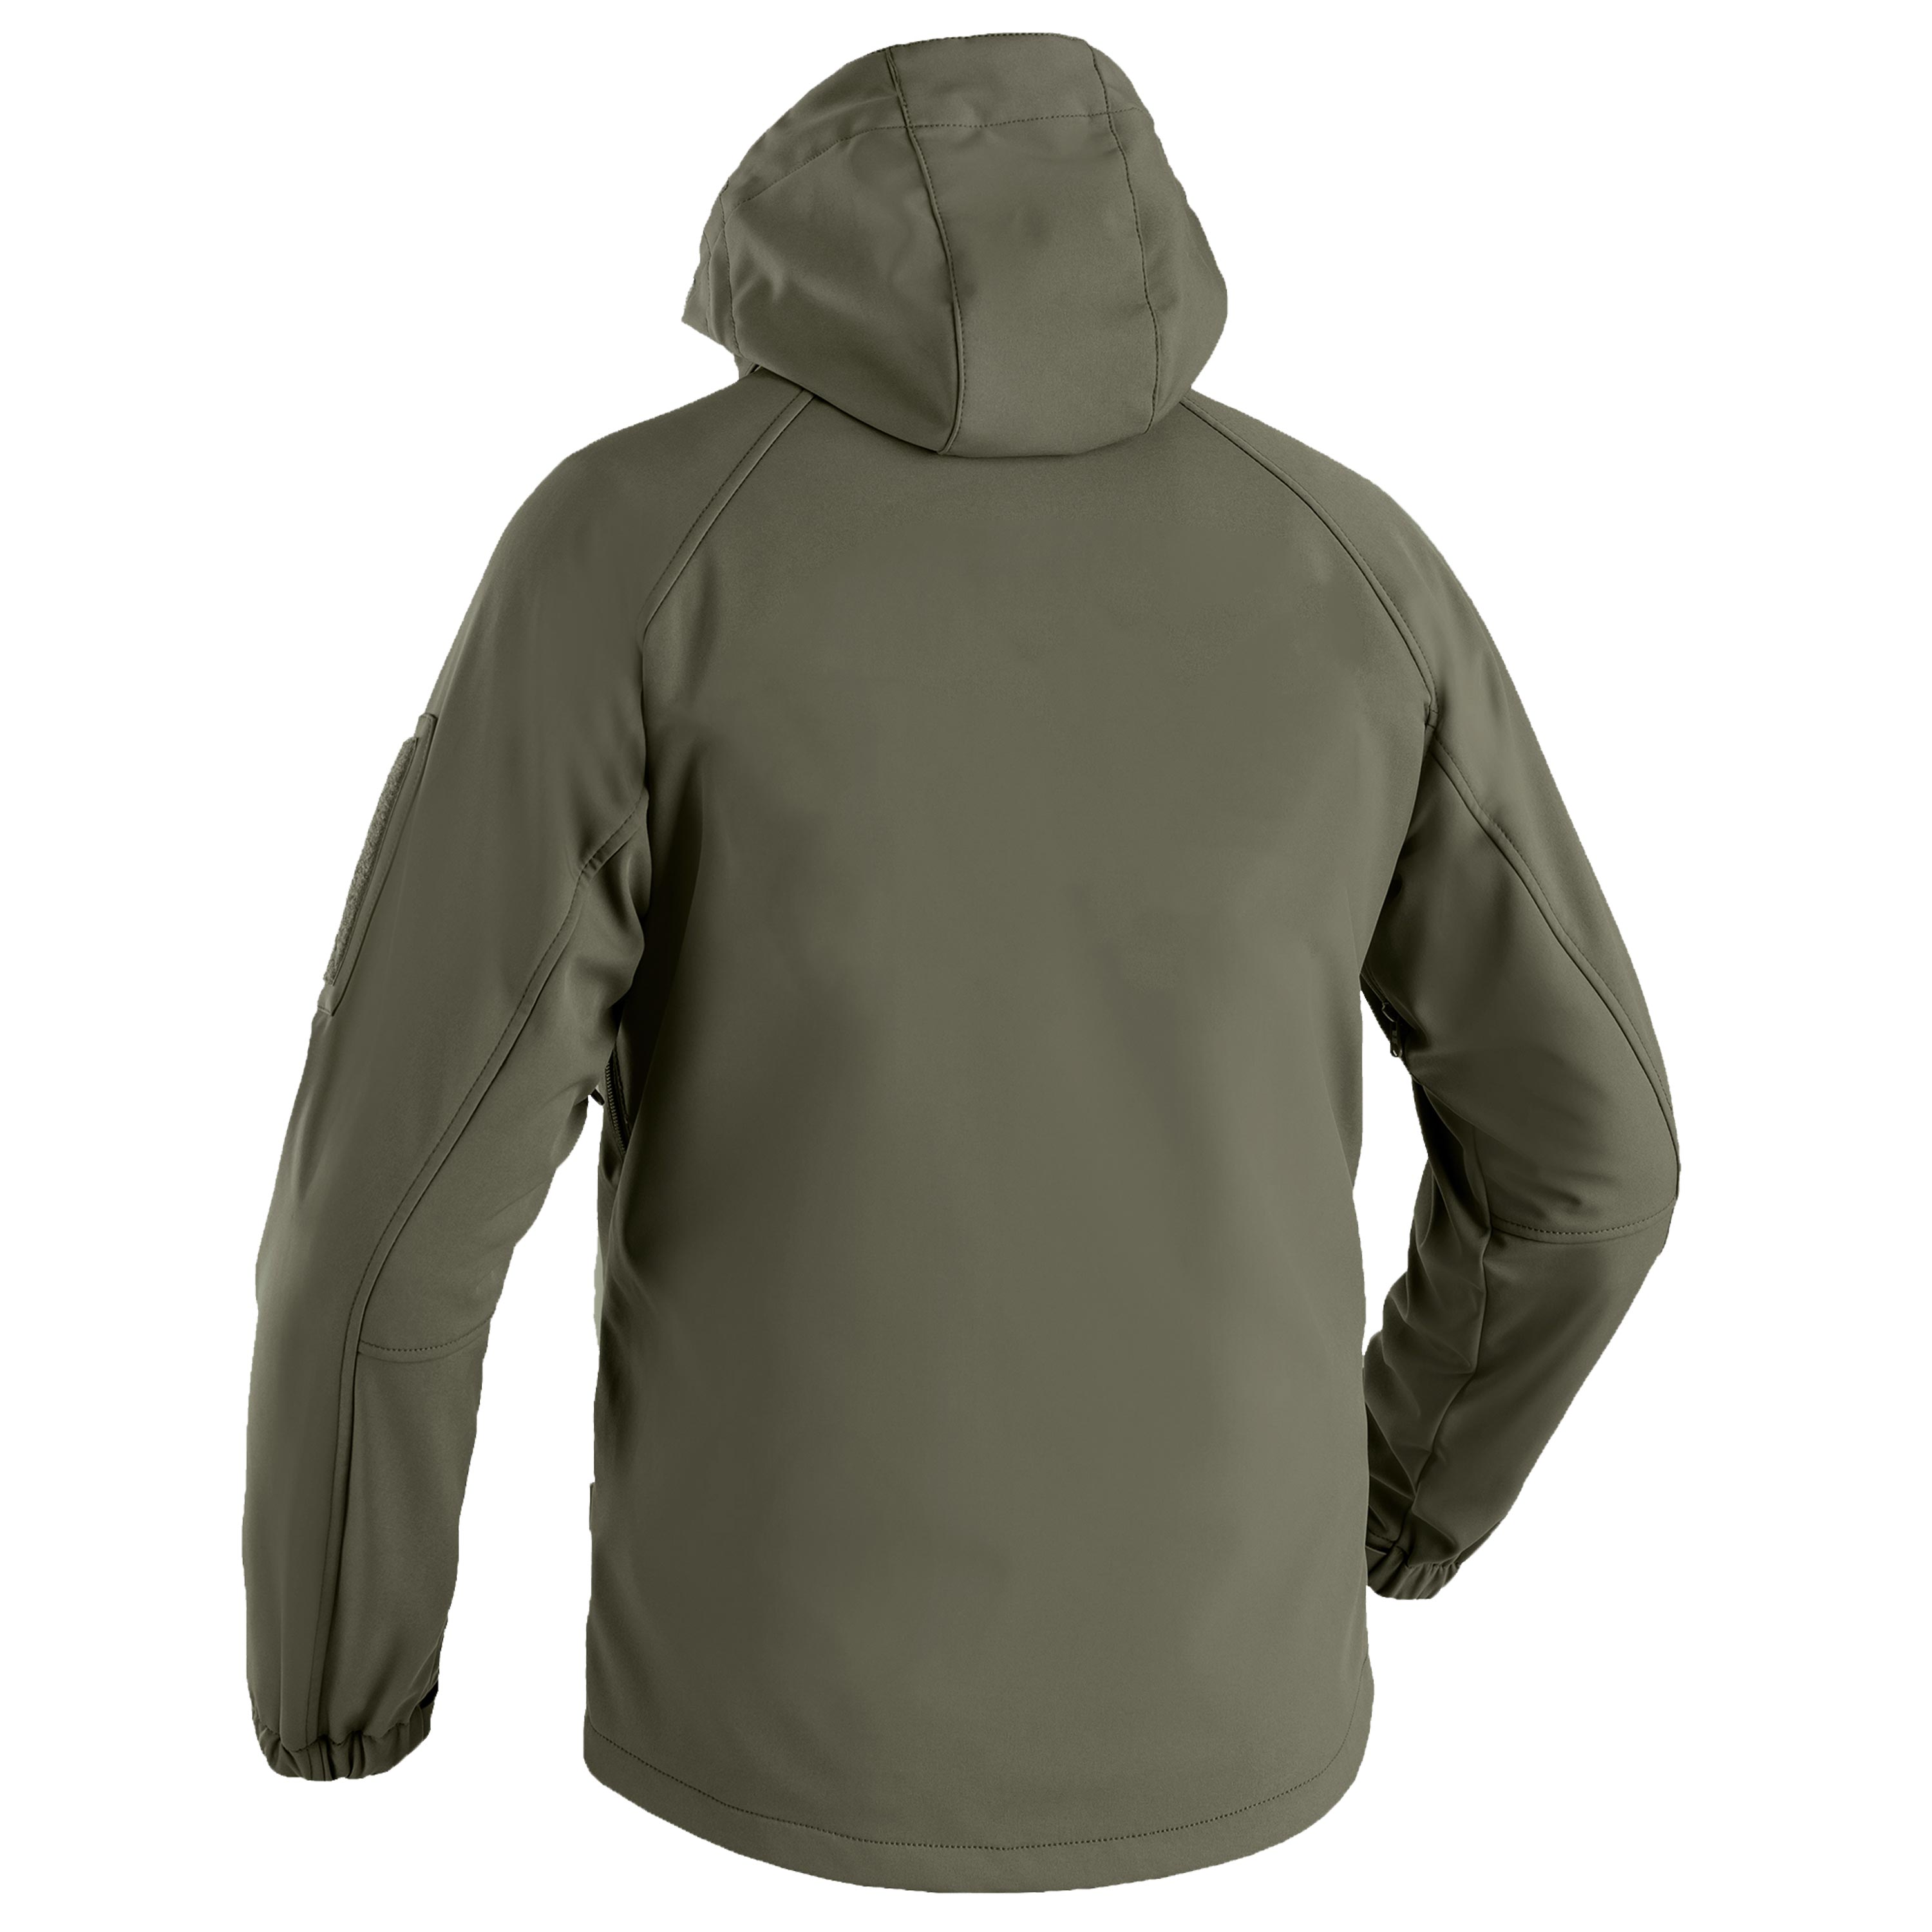 Purchase the A10 Equipment Softshell Jacket Storm Field 2.0 oliv